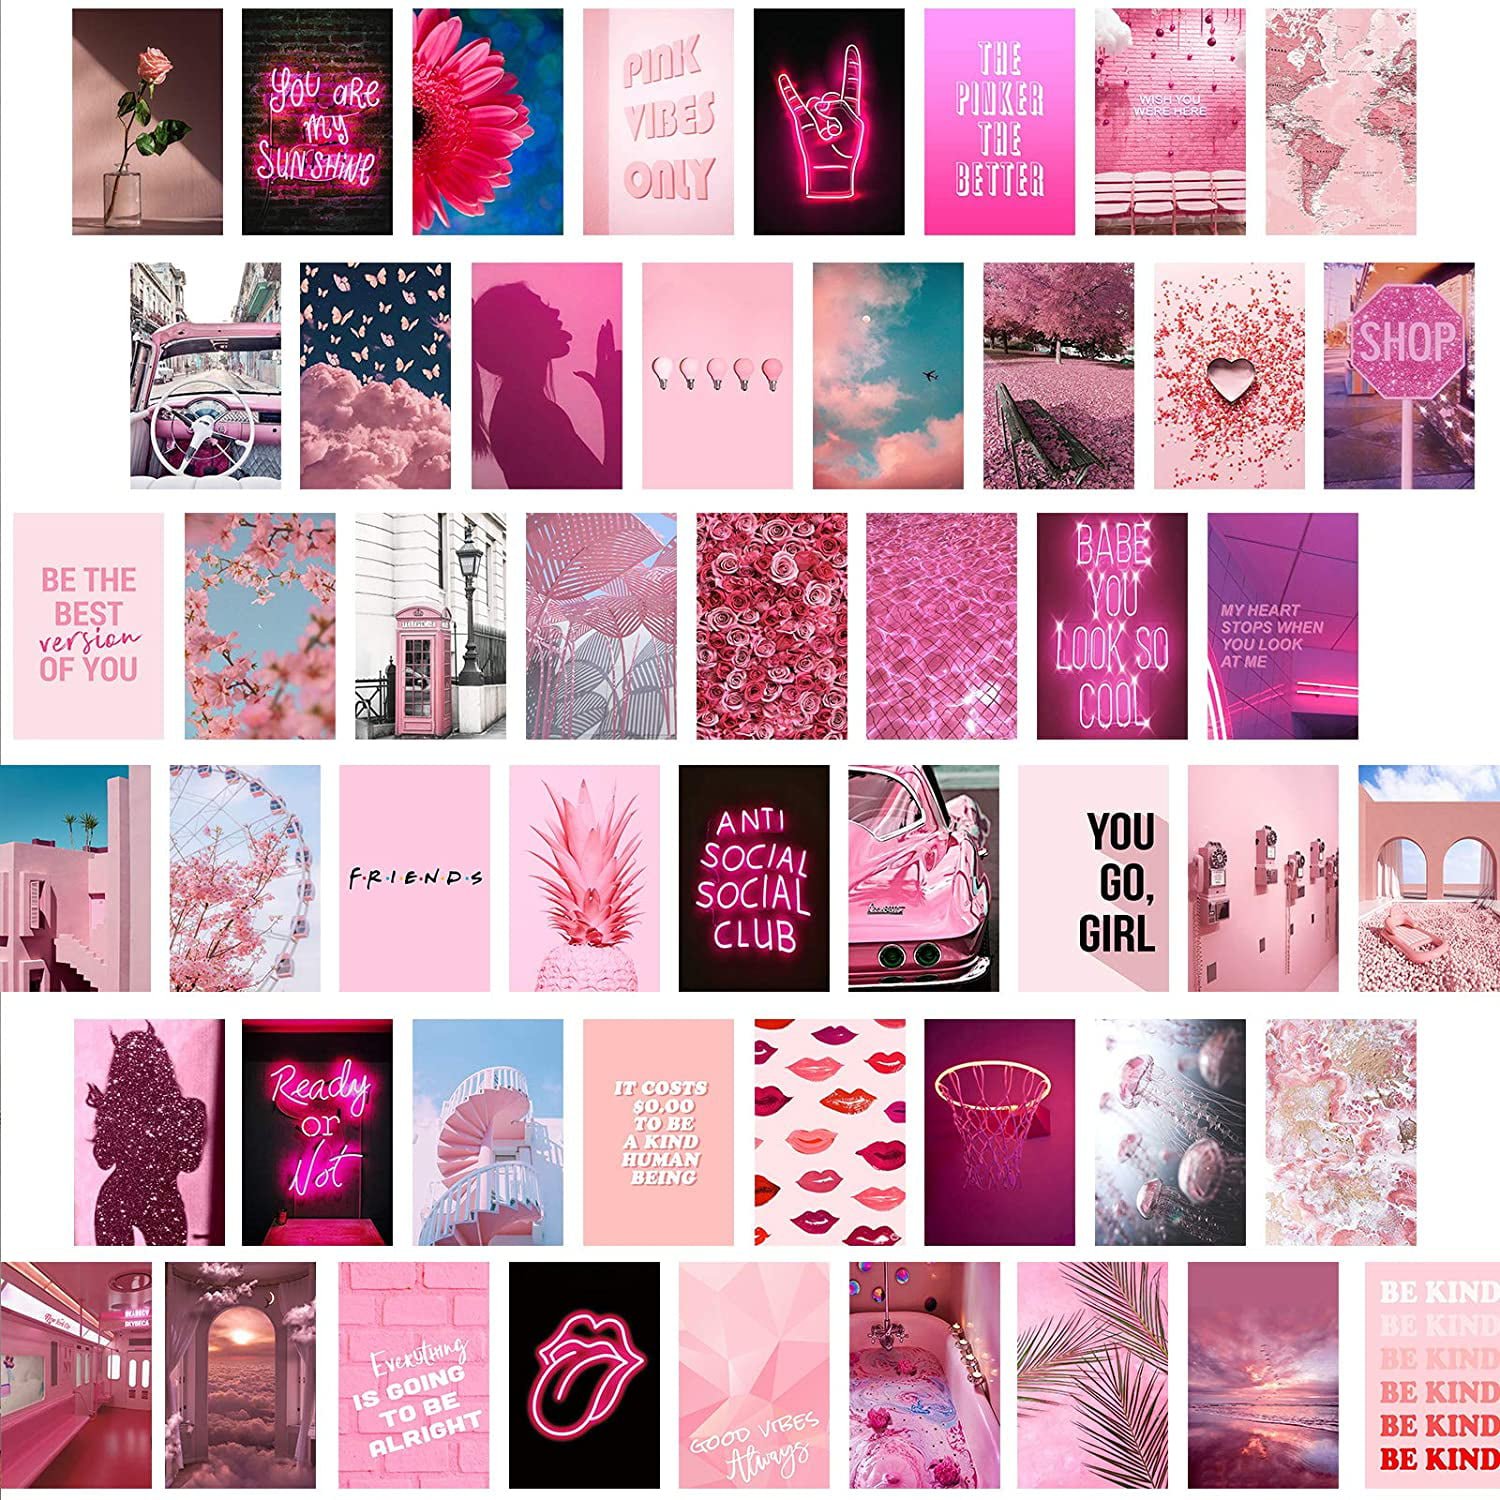 Pink Wall Collage Kit Aesthetic Picture, Aesthetic Room Decor for Teen Girls and Women, Cute Wall Decor for Bedroom, Aesthetic Posters Photo Wall Art, Vsco Room Decor, 50Pcs, 4x6 Inch